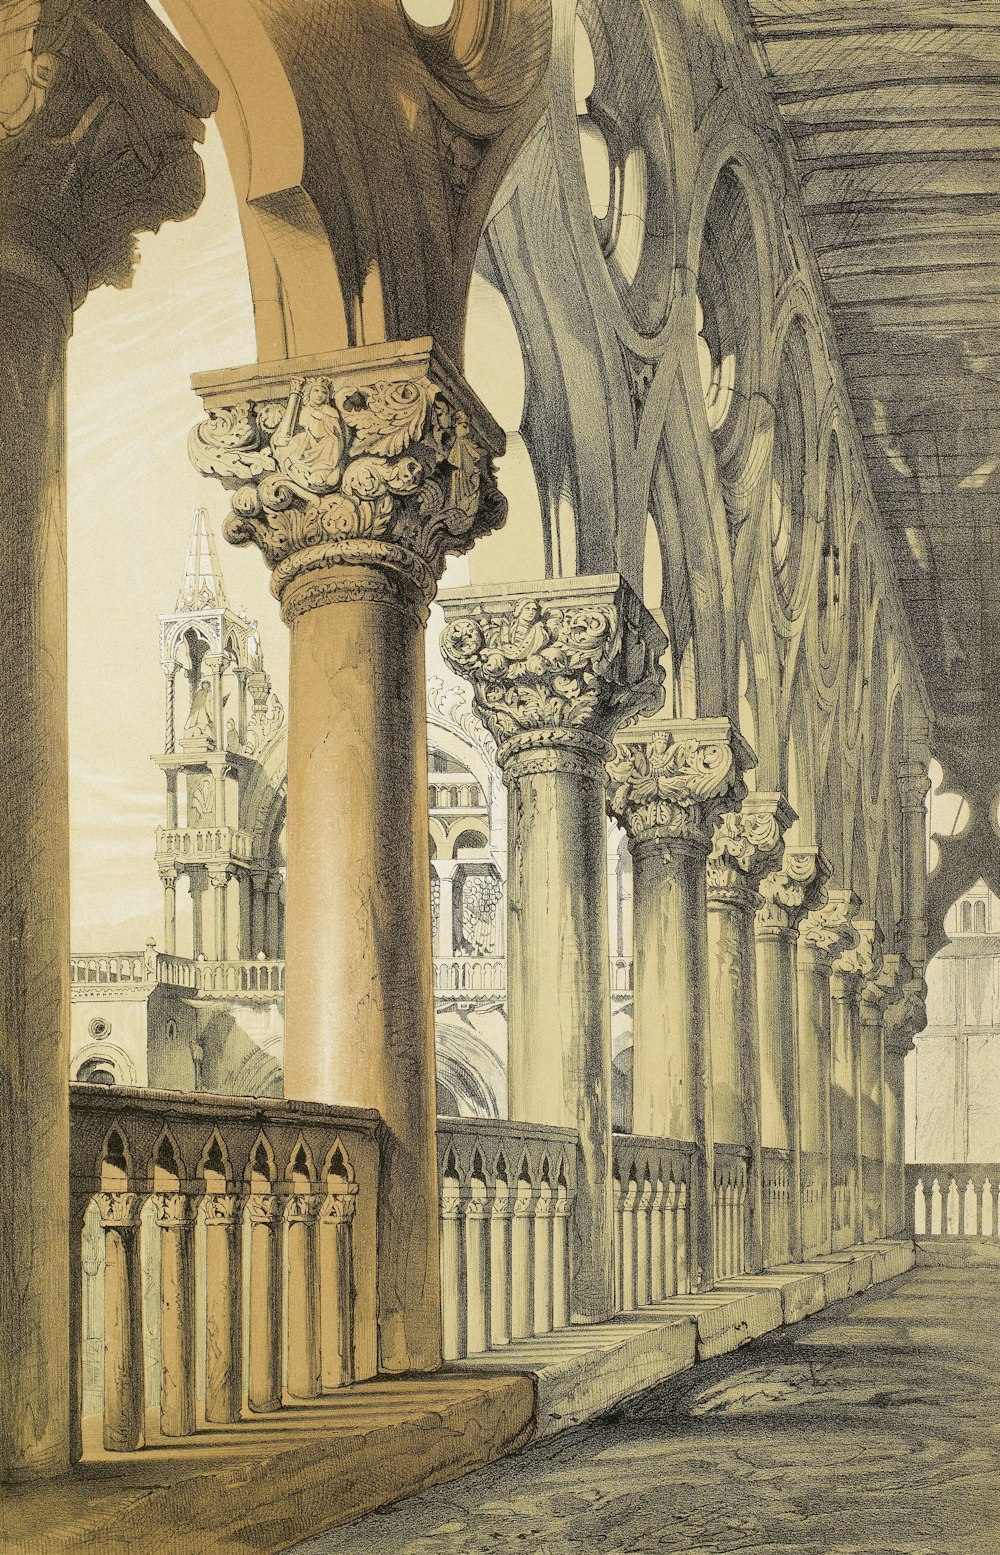 a drawing of a building with columns and arches